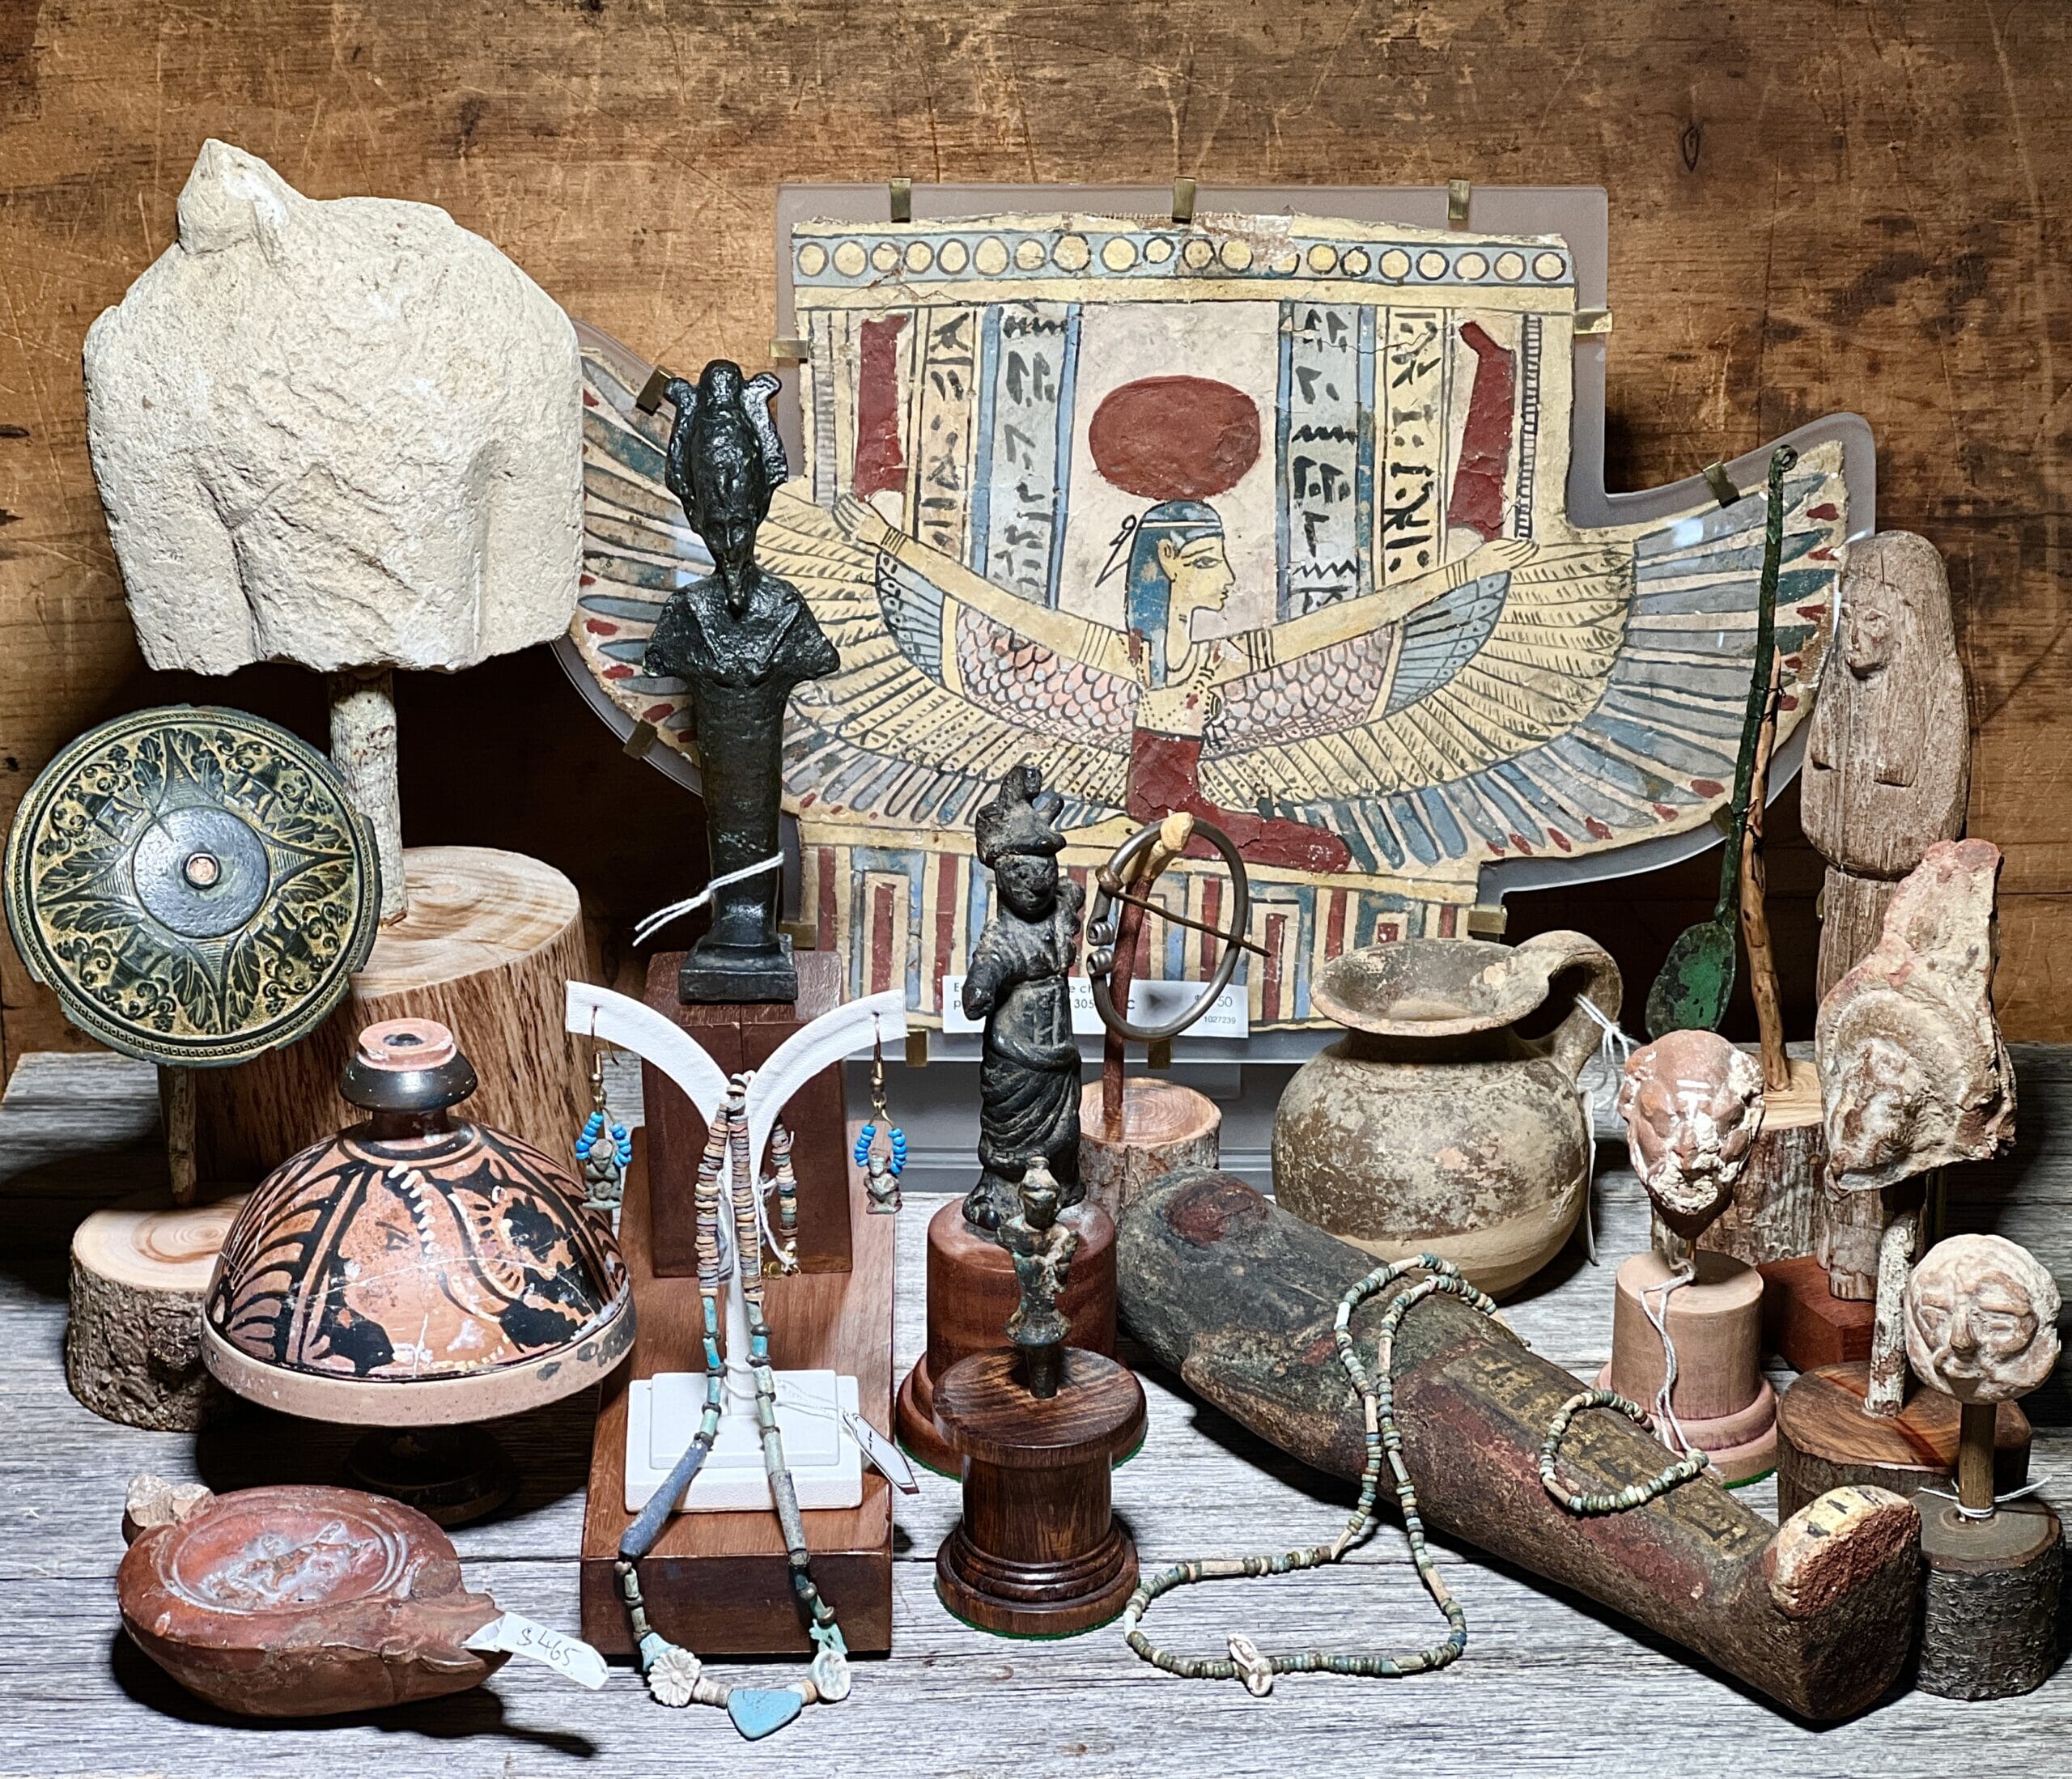 Antiquities from Greece, Rome, Egypt, at Moorabool Antiques, Geelong, Australia